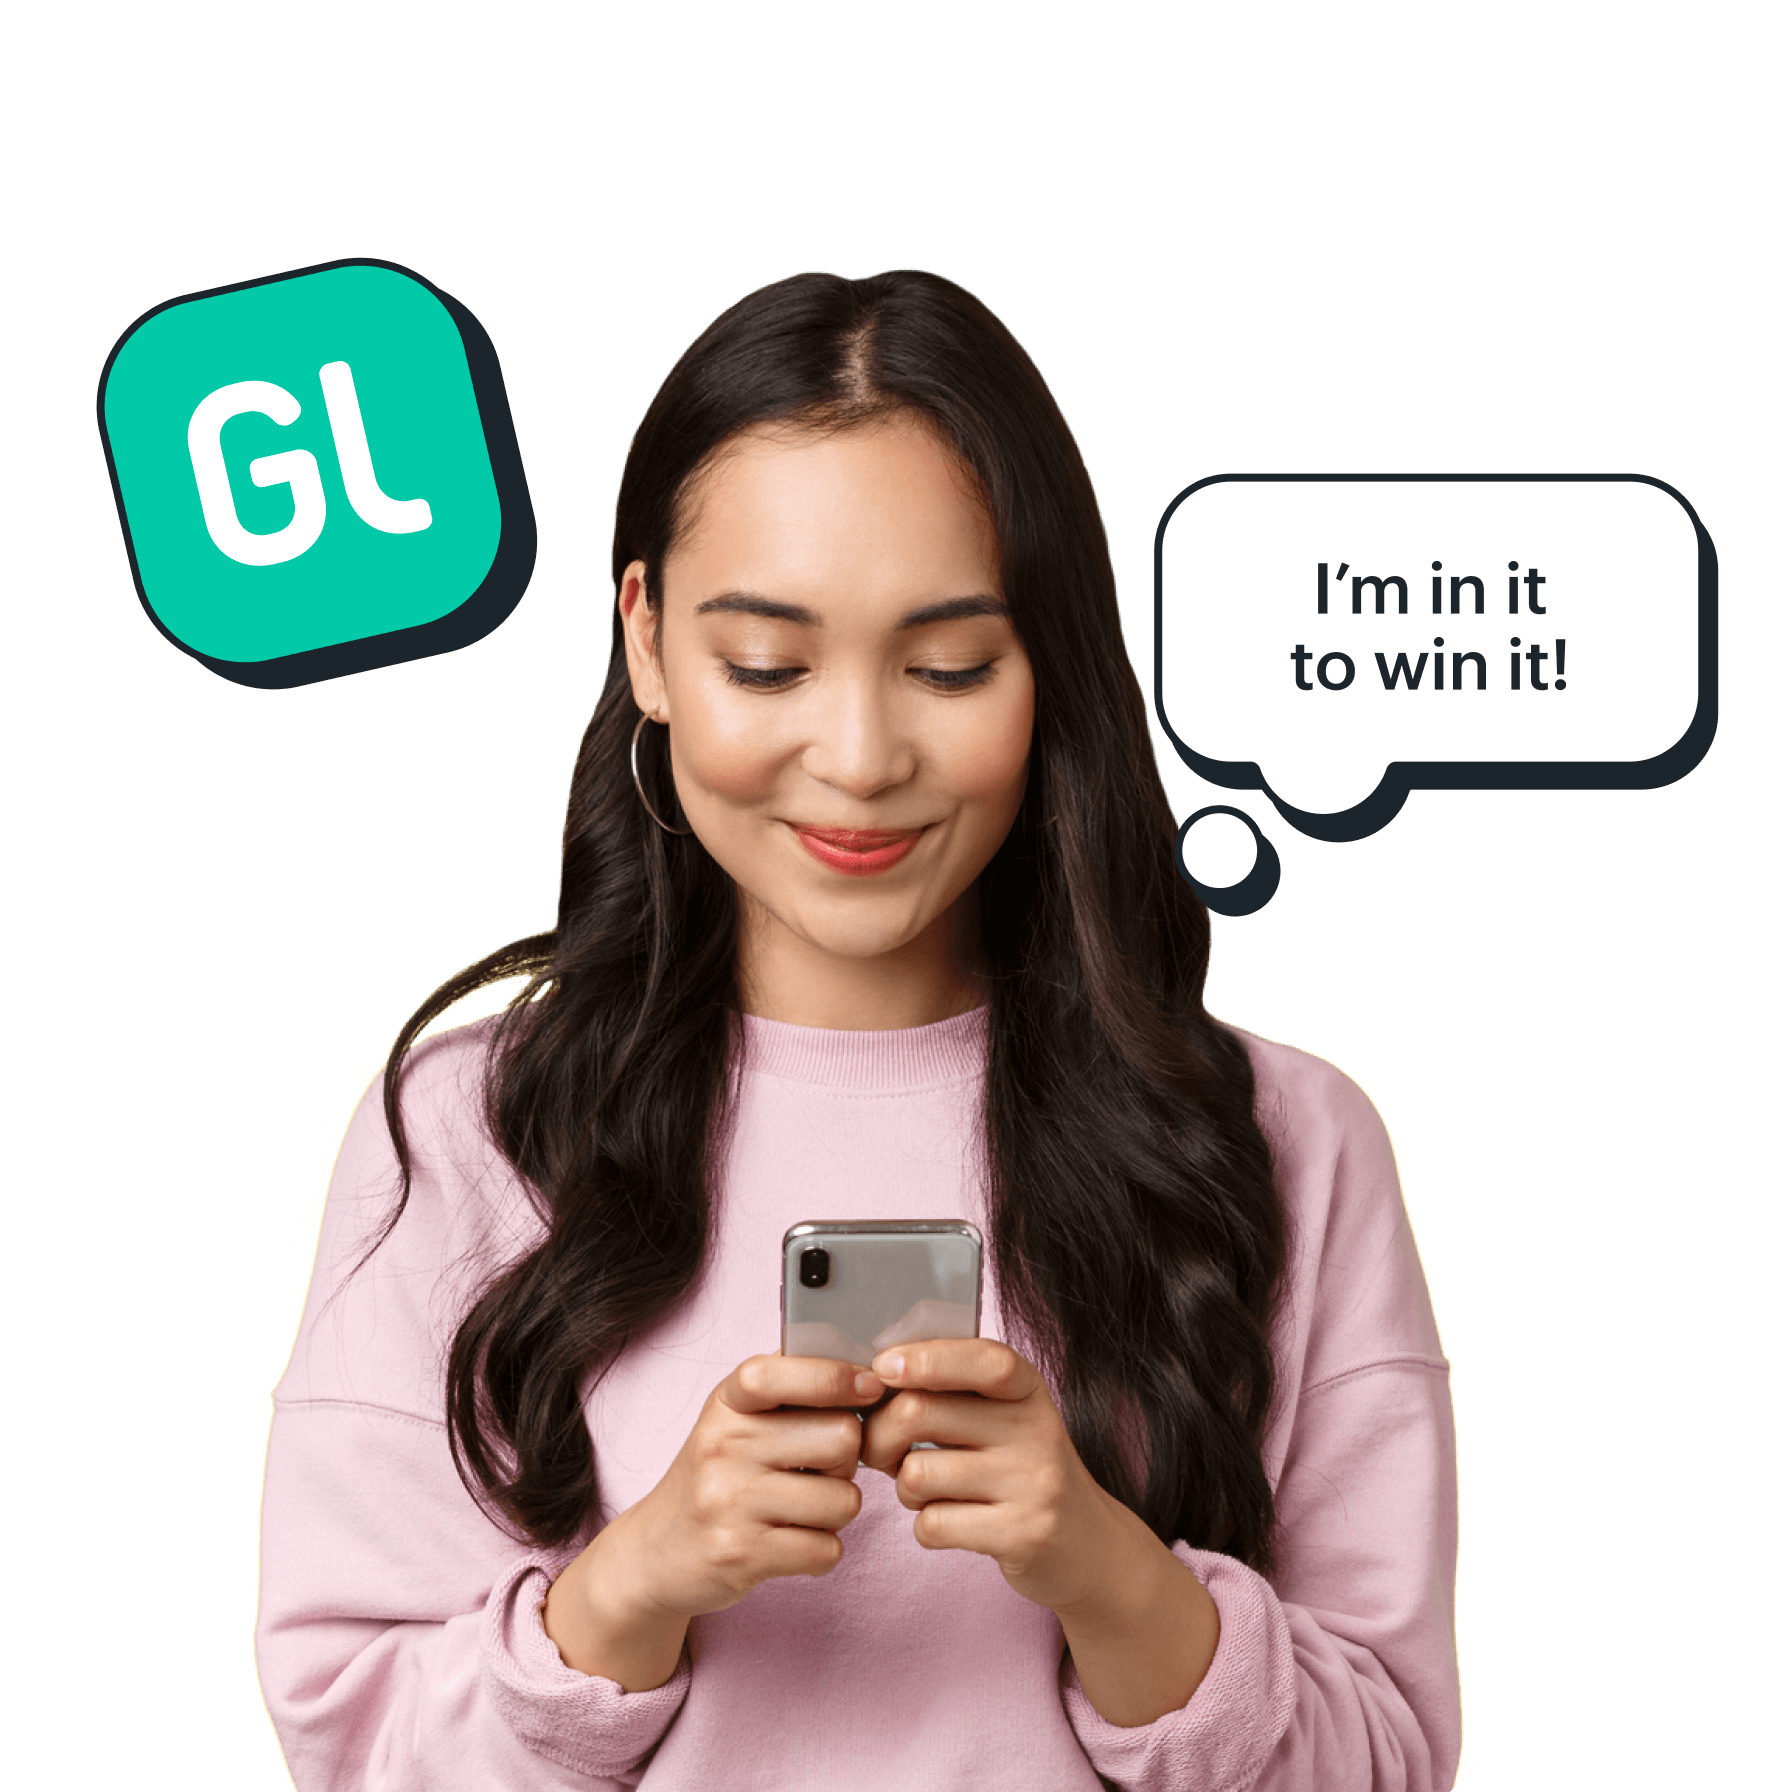 girl on her smartphone with greenlight and "in it to win it" thought bubble